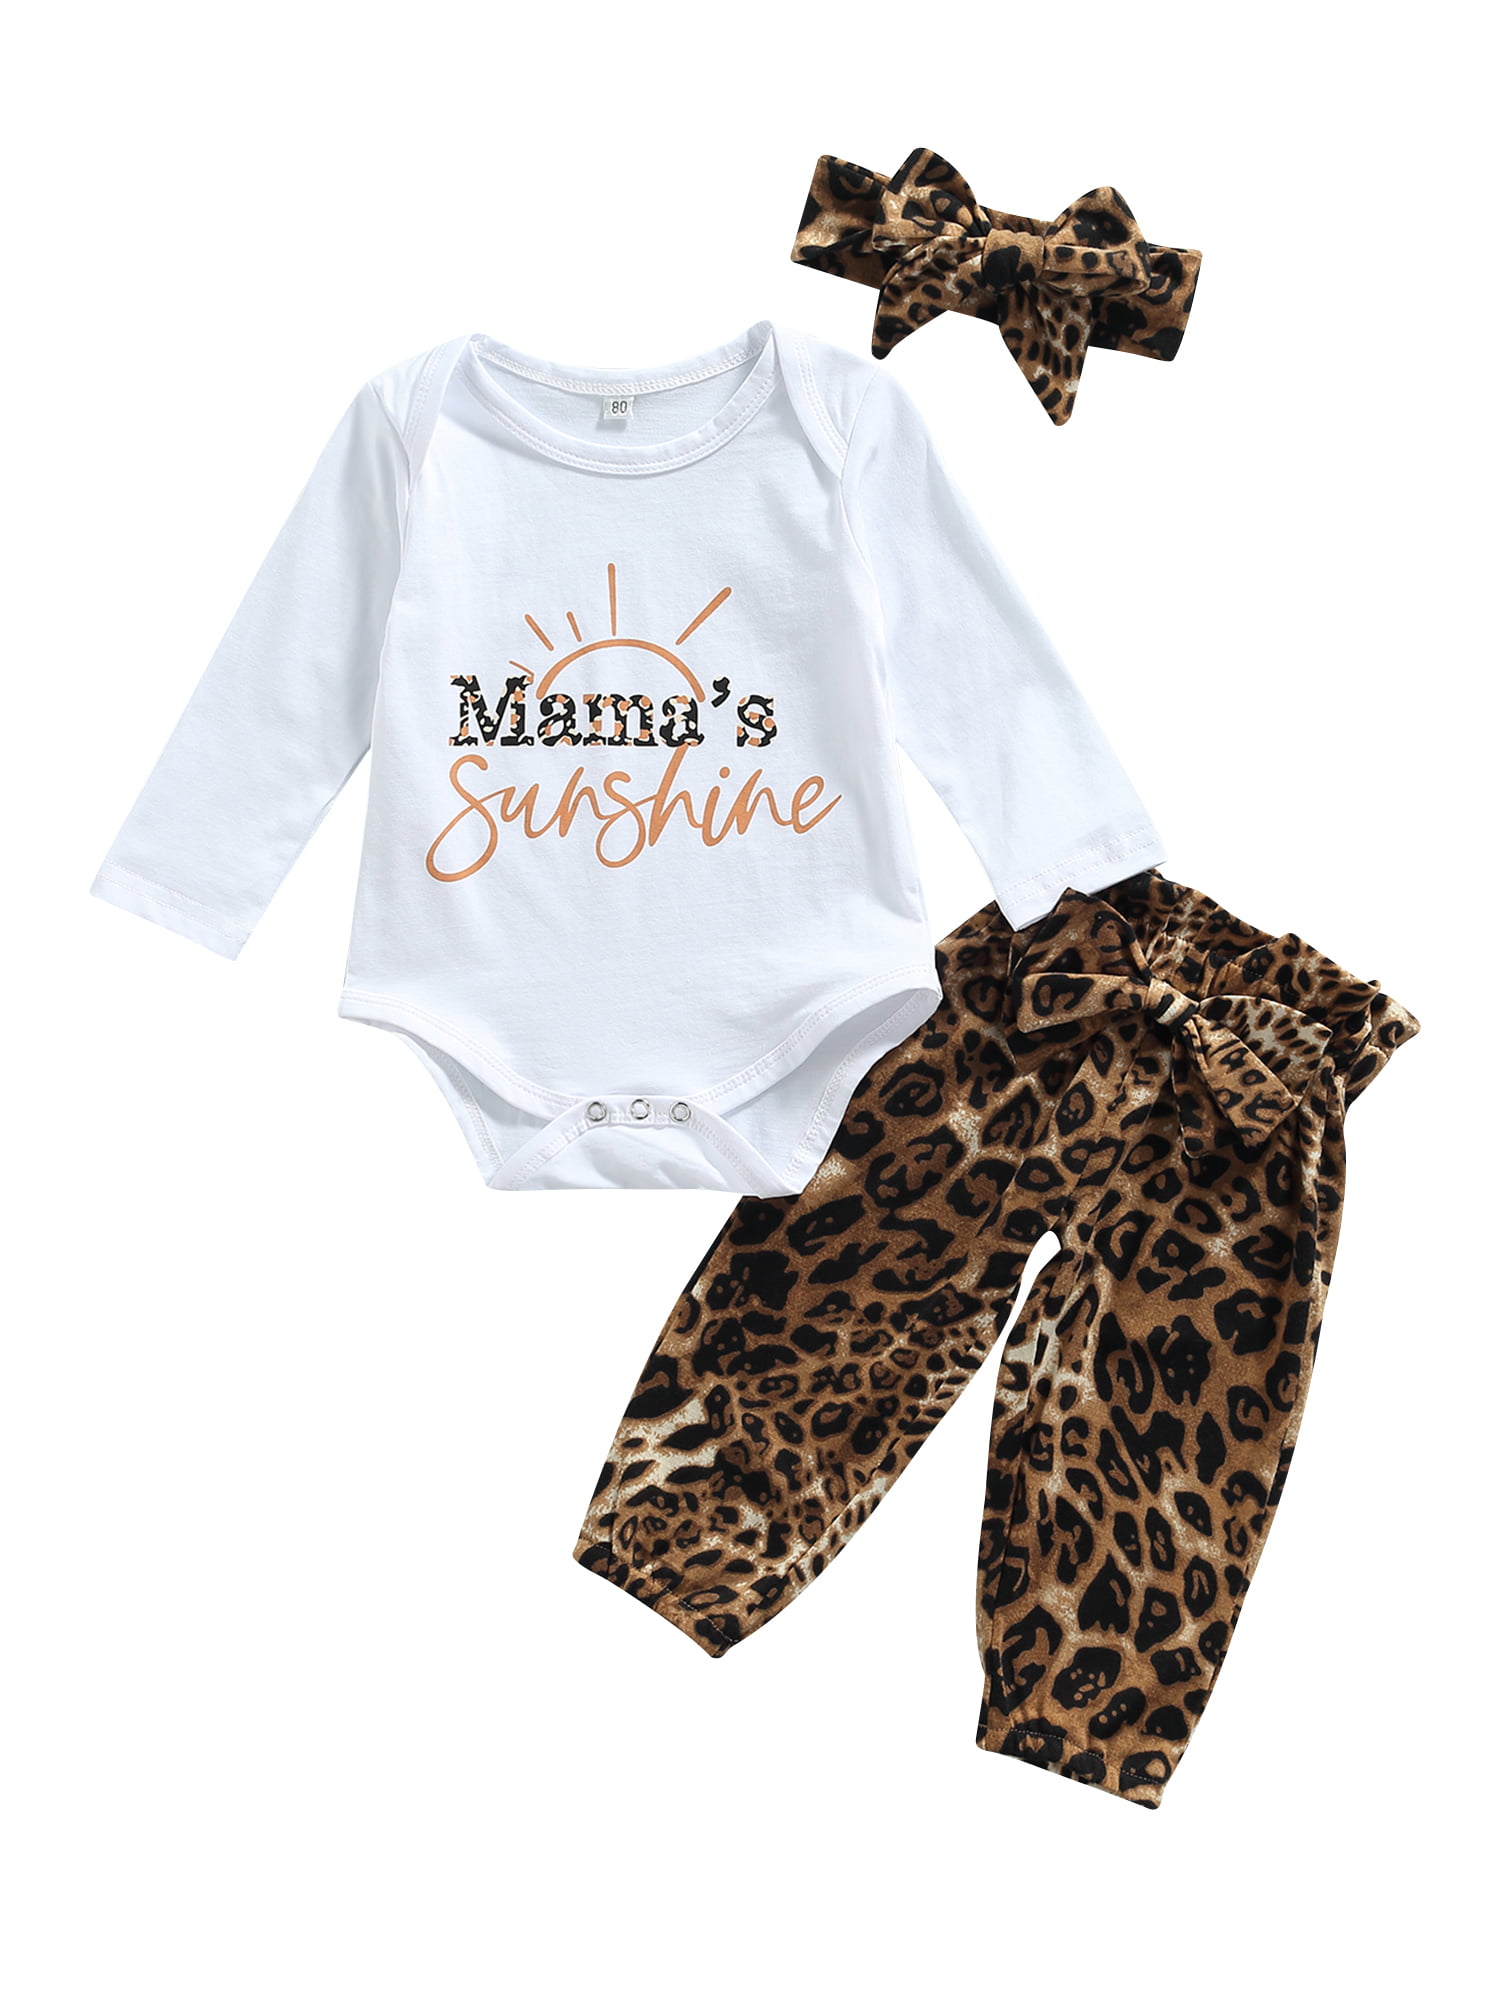 squarex 3pcs Sunny Baby Boy Girl Clothes Set Hoodie Tops+Pants+Headband Outfits